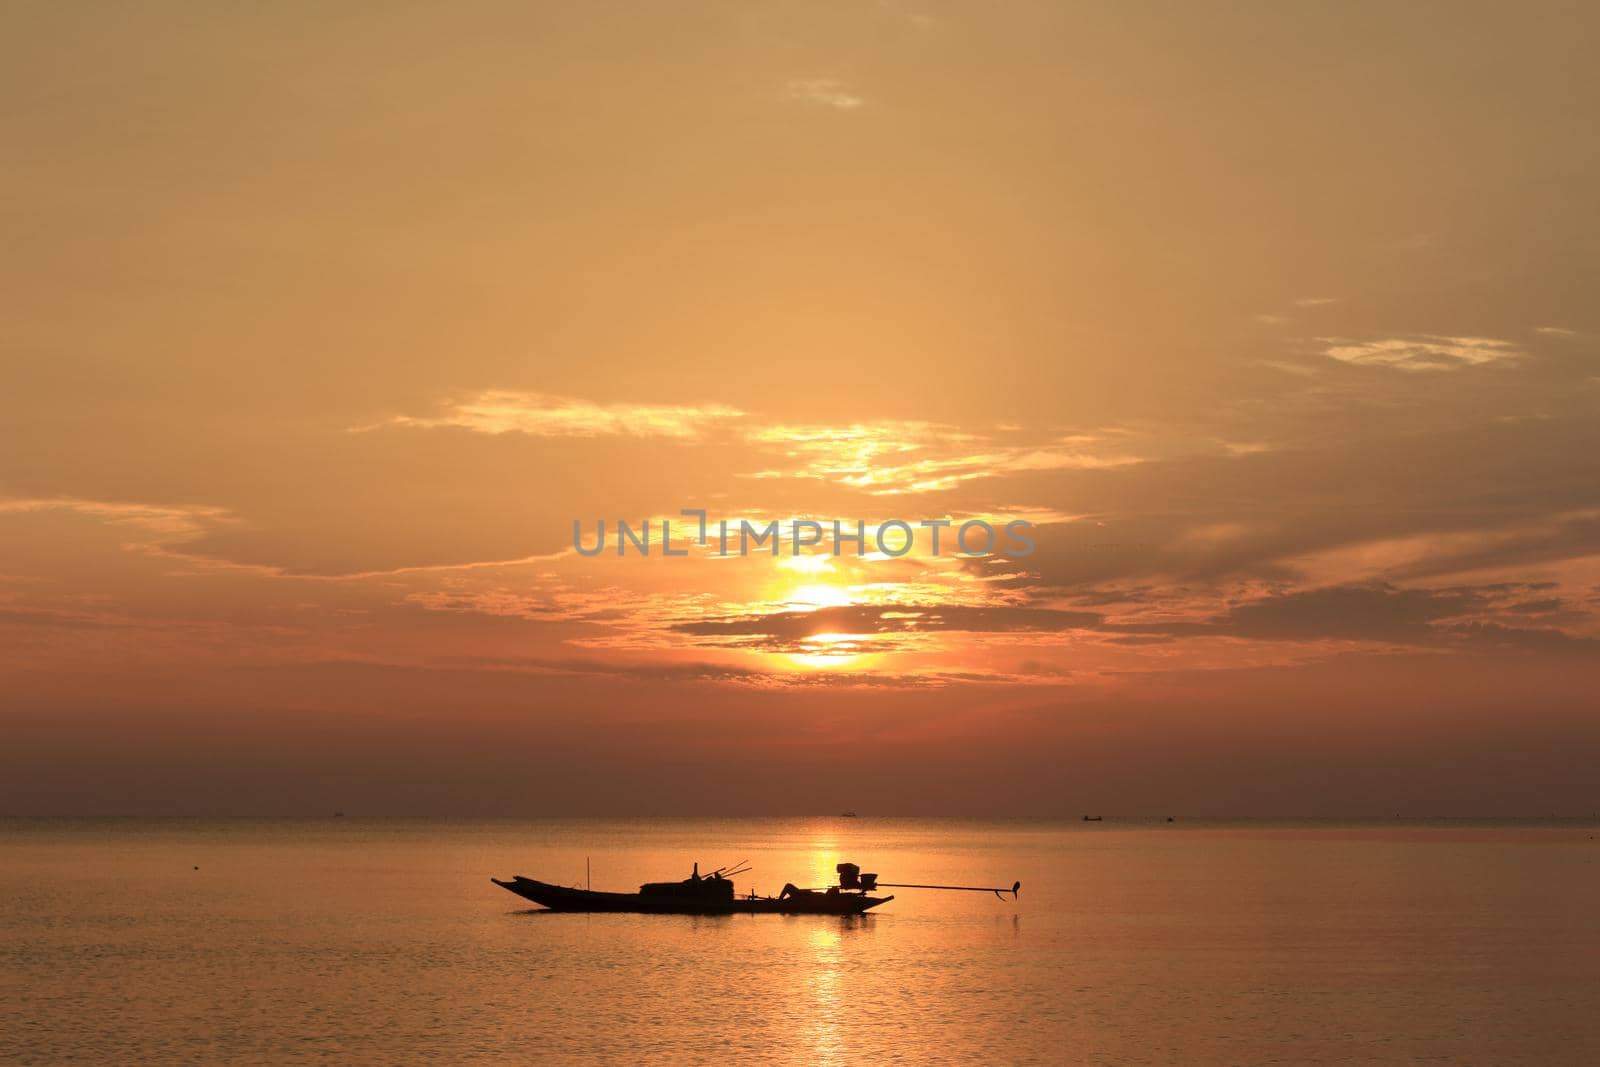 Boat silhouette, early morning, different perspectives, near and far